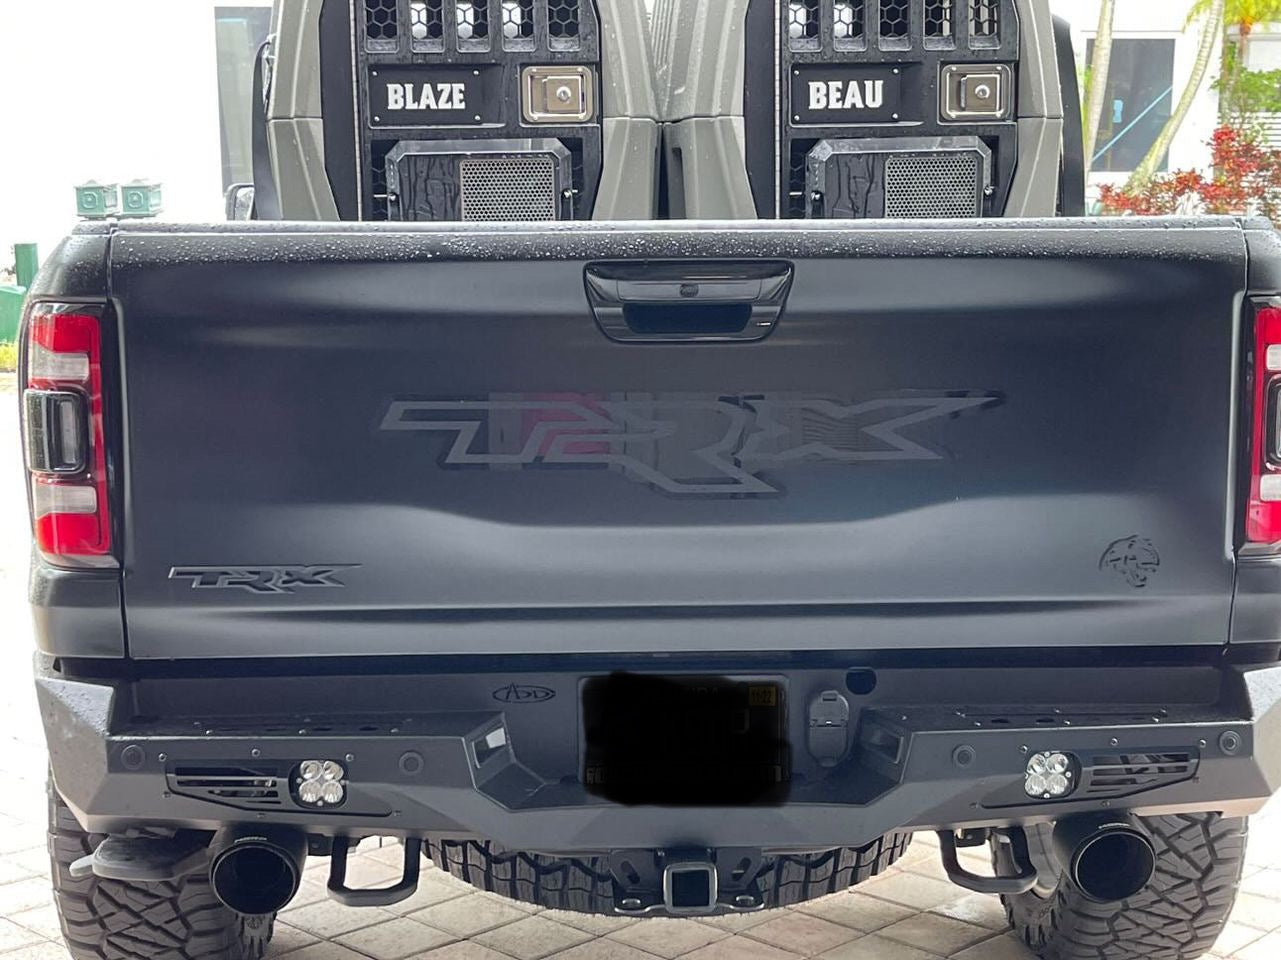 TRX Tailgate replacement badge